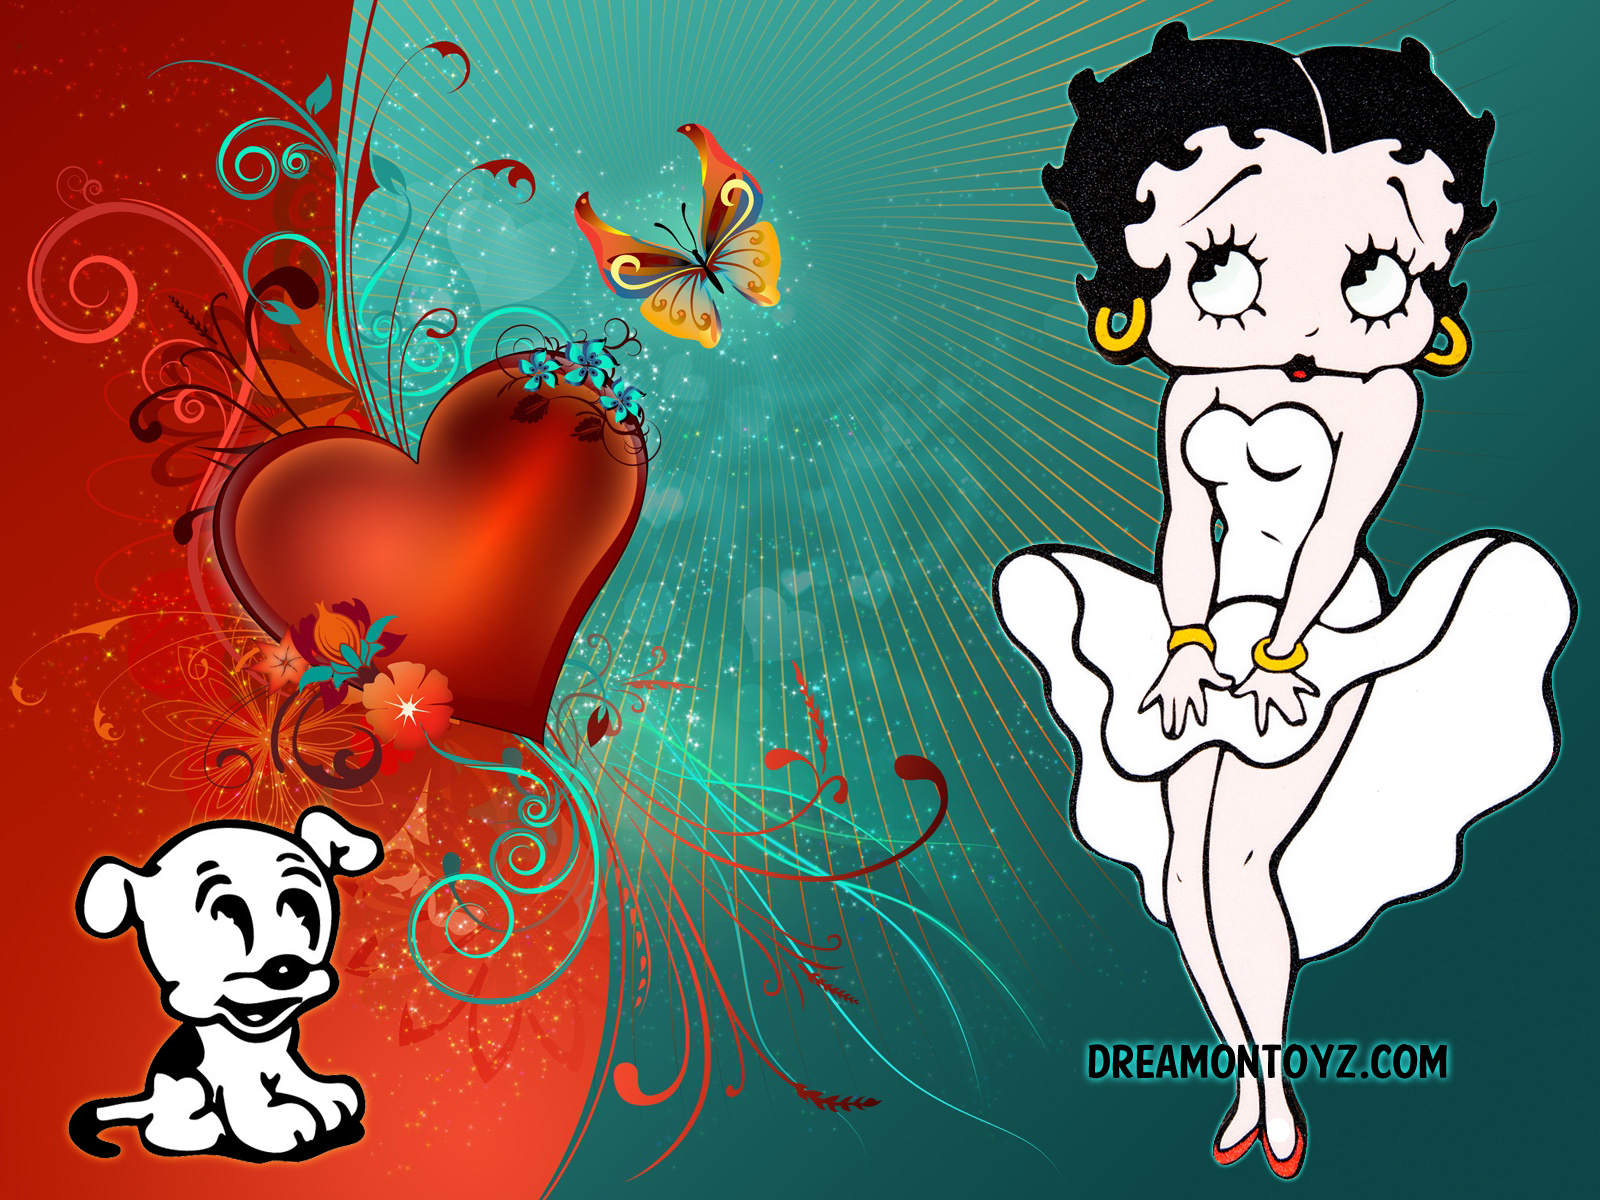 Betty Boop Pictures Archive: Betty Boop and Pudgy wallpapers